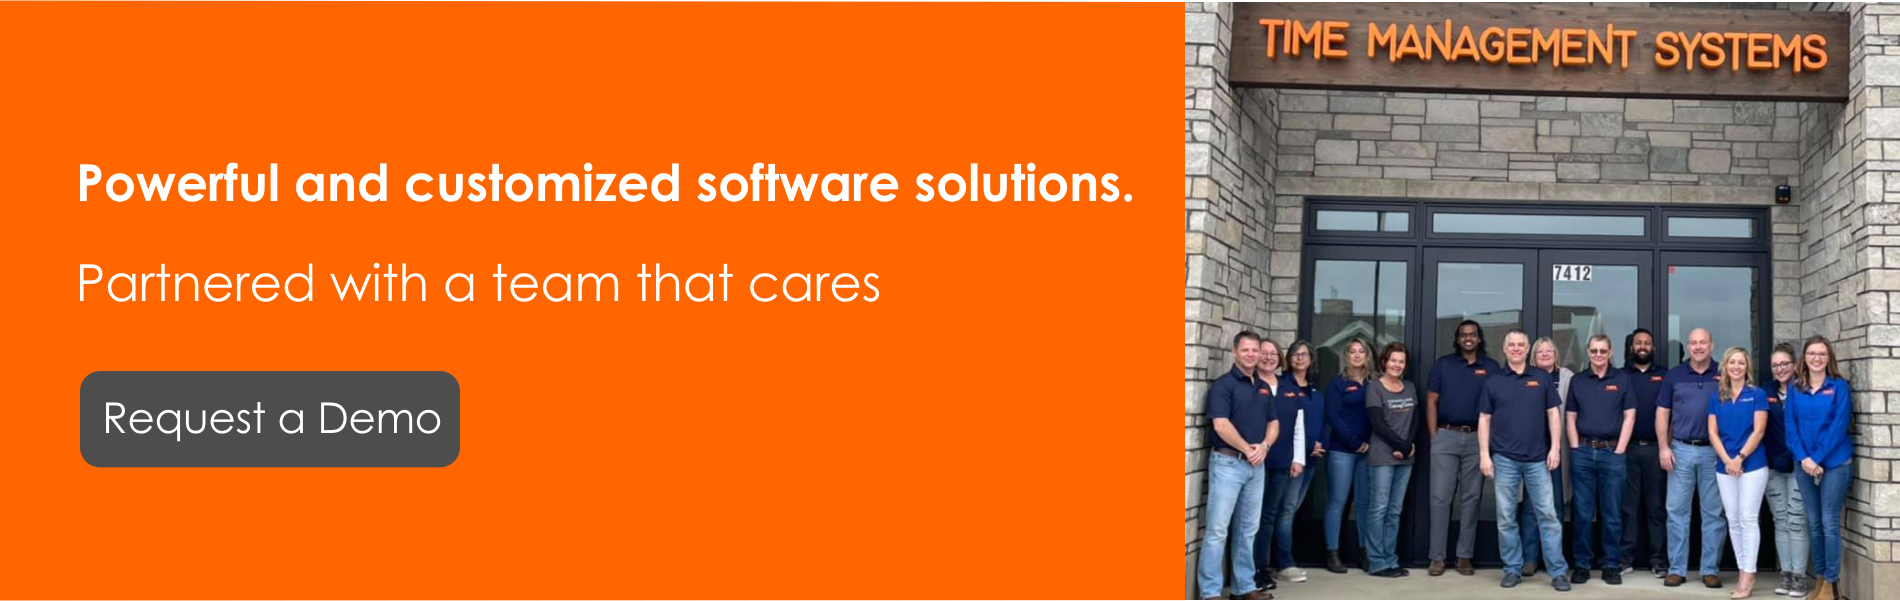 Powerful and customized software solutions.